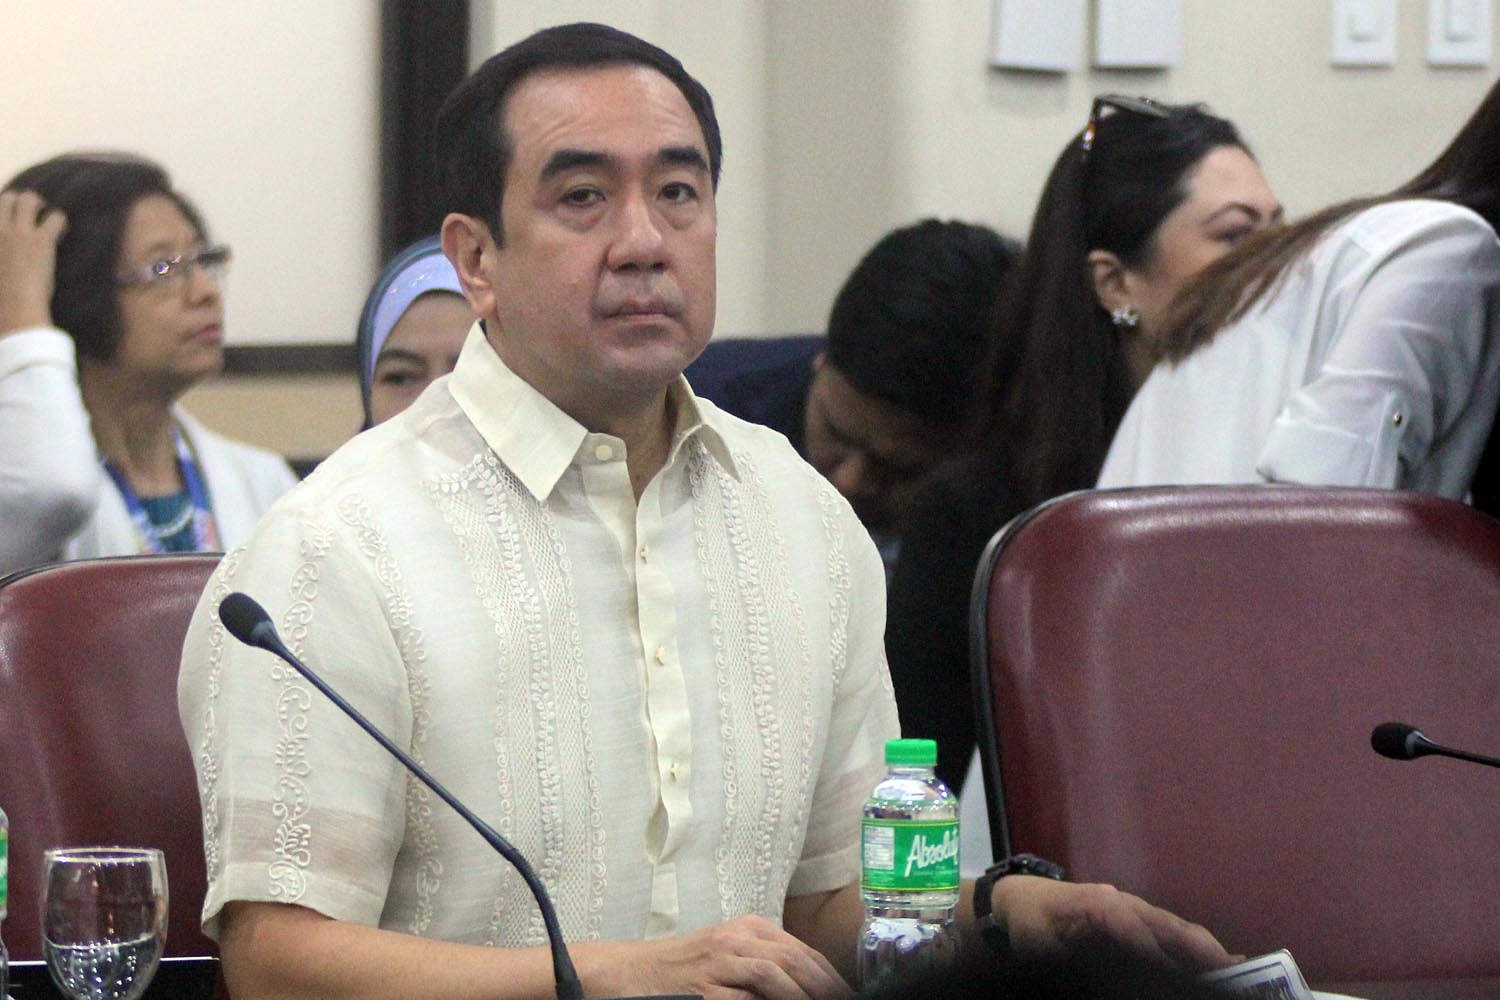 EMBATTLED POLL CHIEF. Comelec Chairman Andres Bautista attends the House hearing on the poll body's budget, as he faces his own personal issues stemming from allegations made by his estranged wife. File photo by Darren Langit/Rappler 